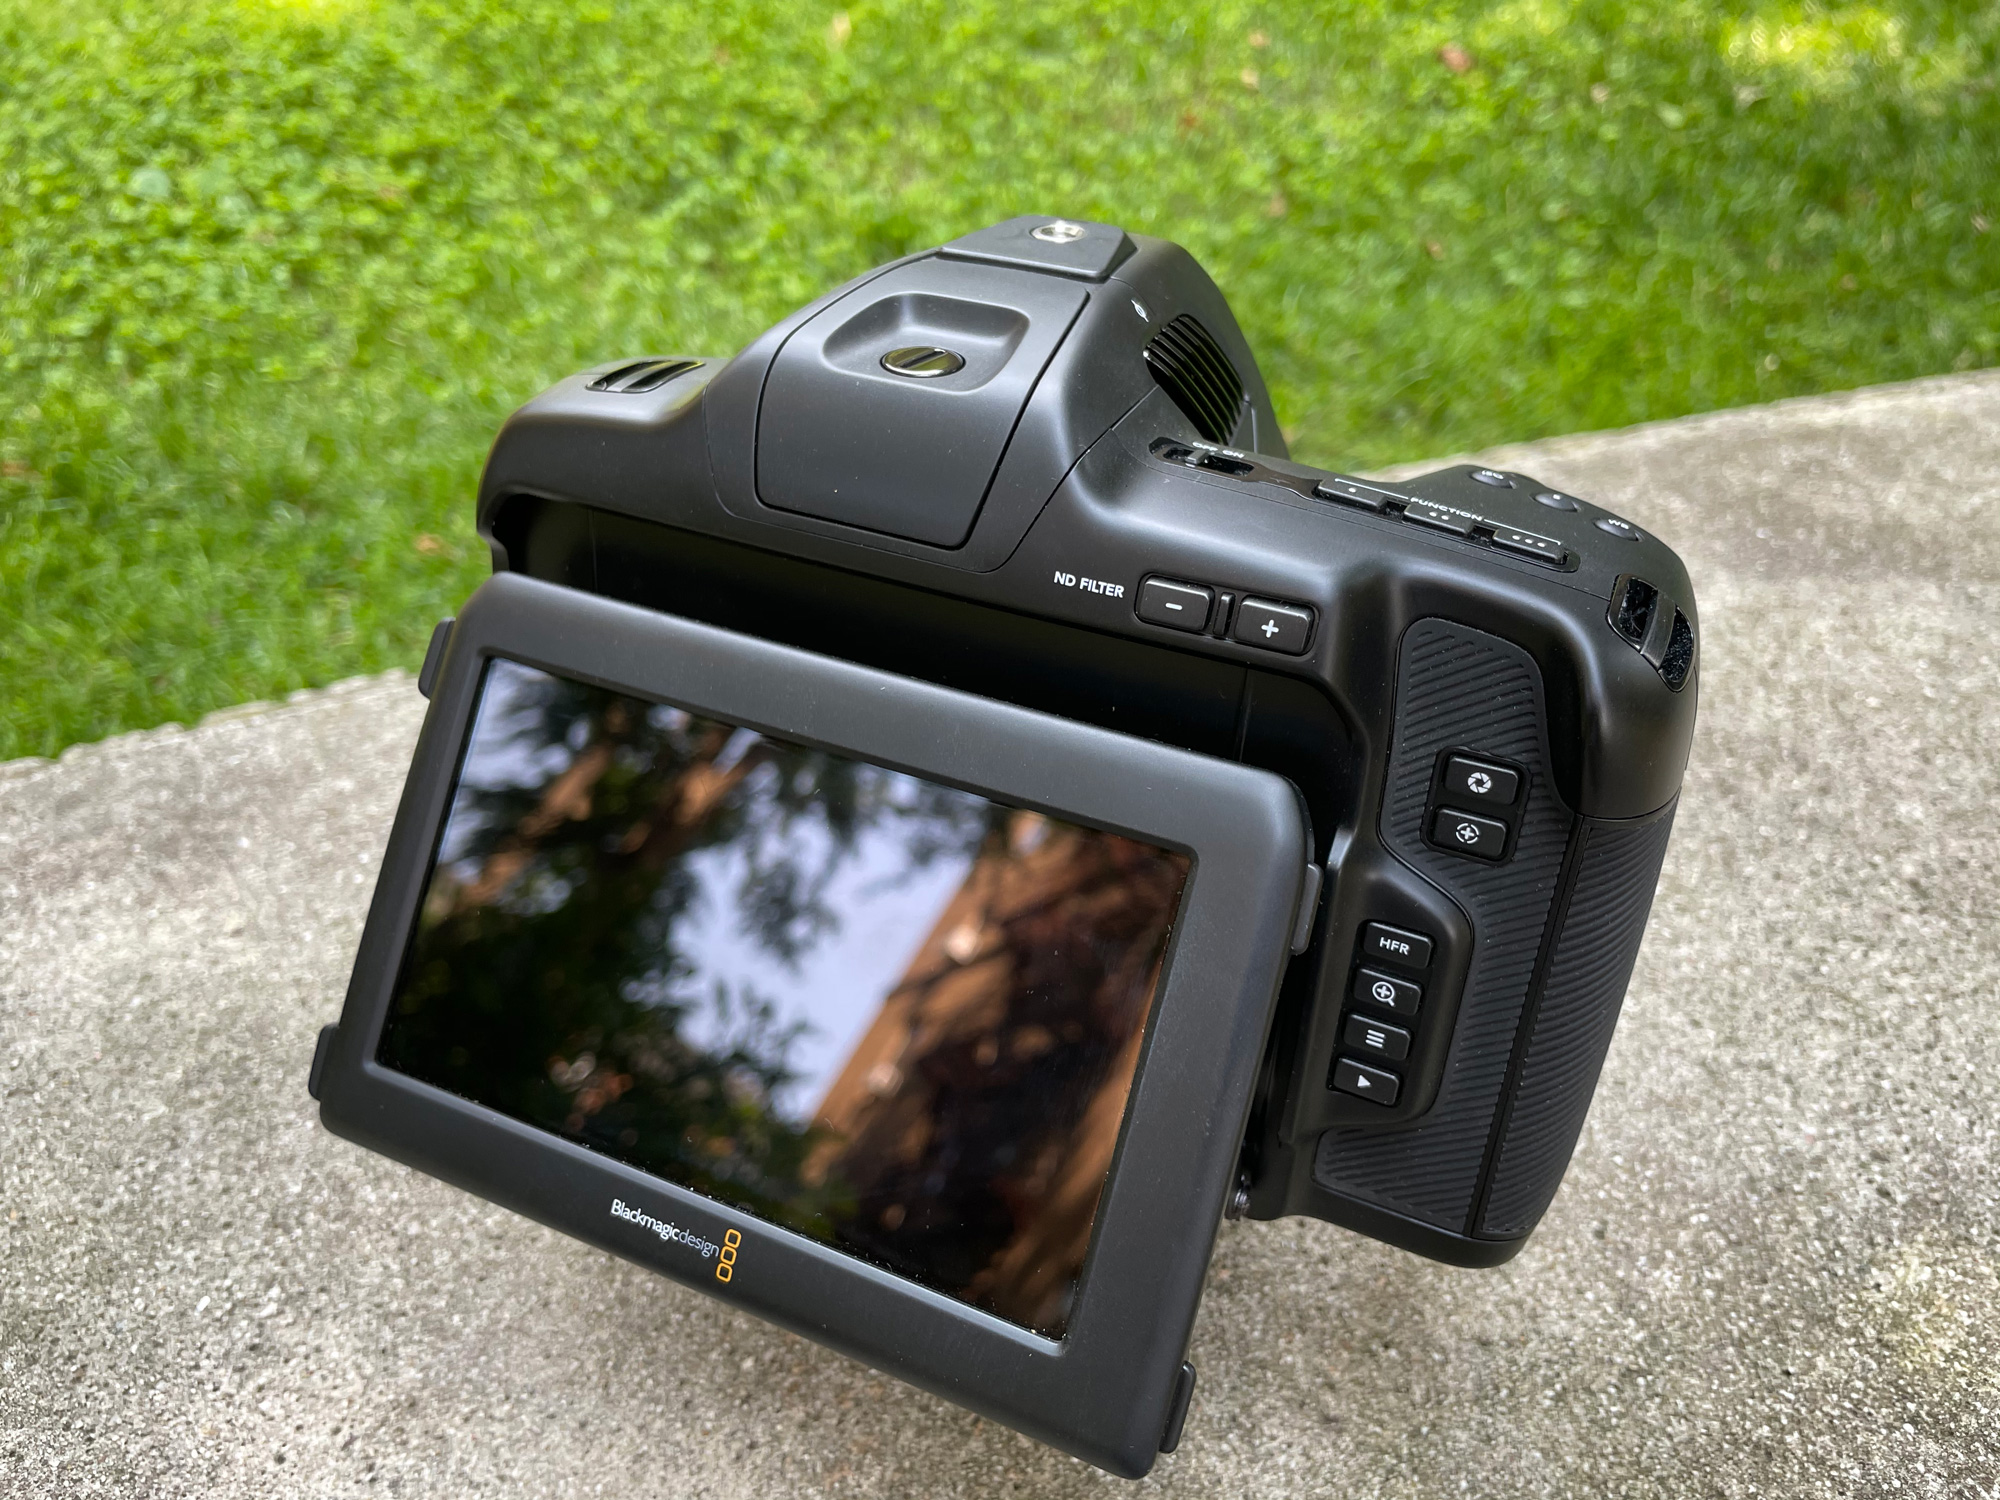 Blackmagic Pocket 6K Pro review: Pro-grade performance on an indie budget